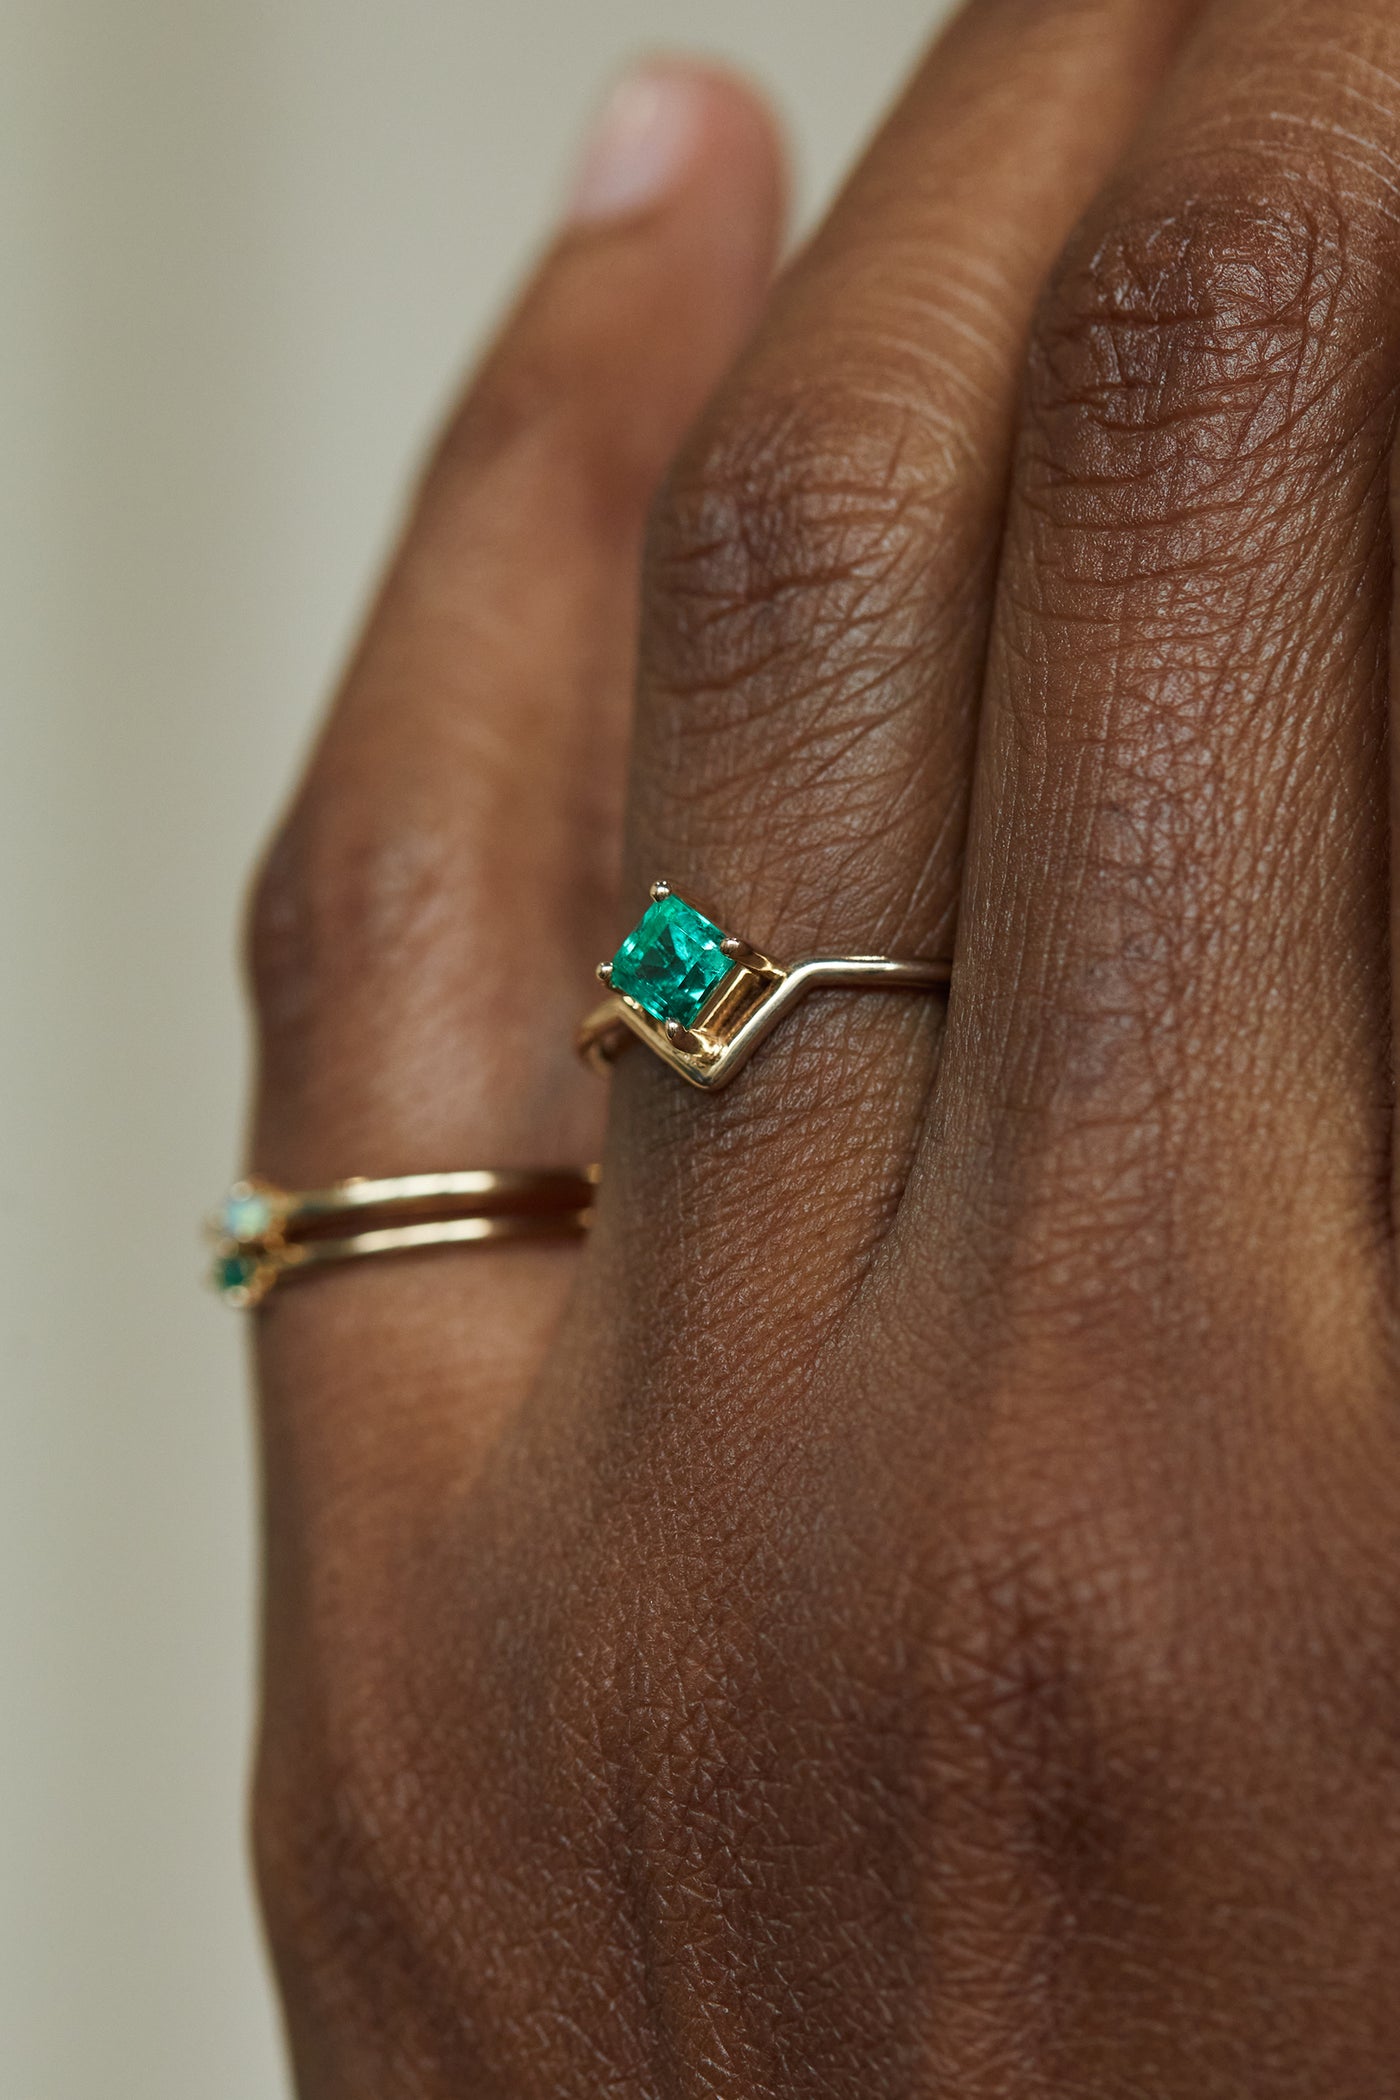 One of a Kind Nestled Emerald Ring